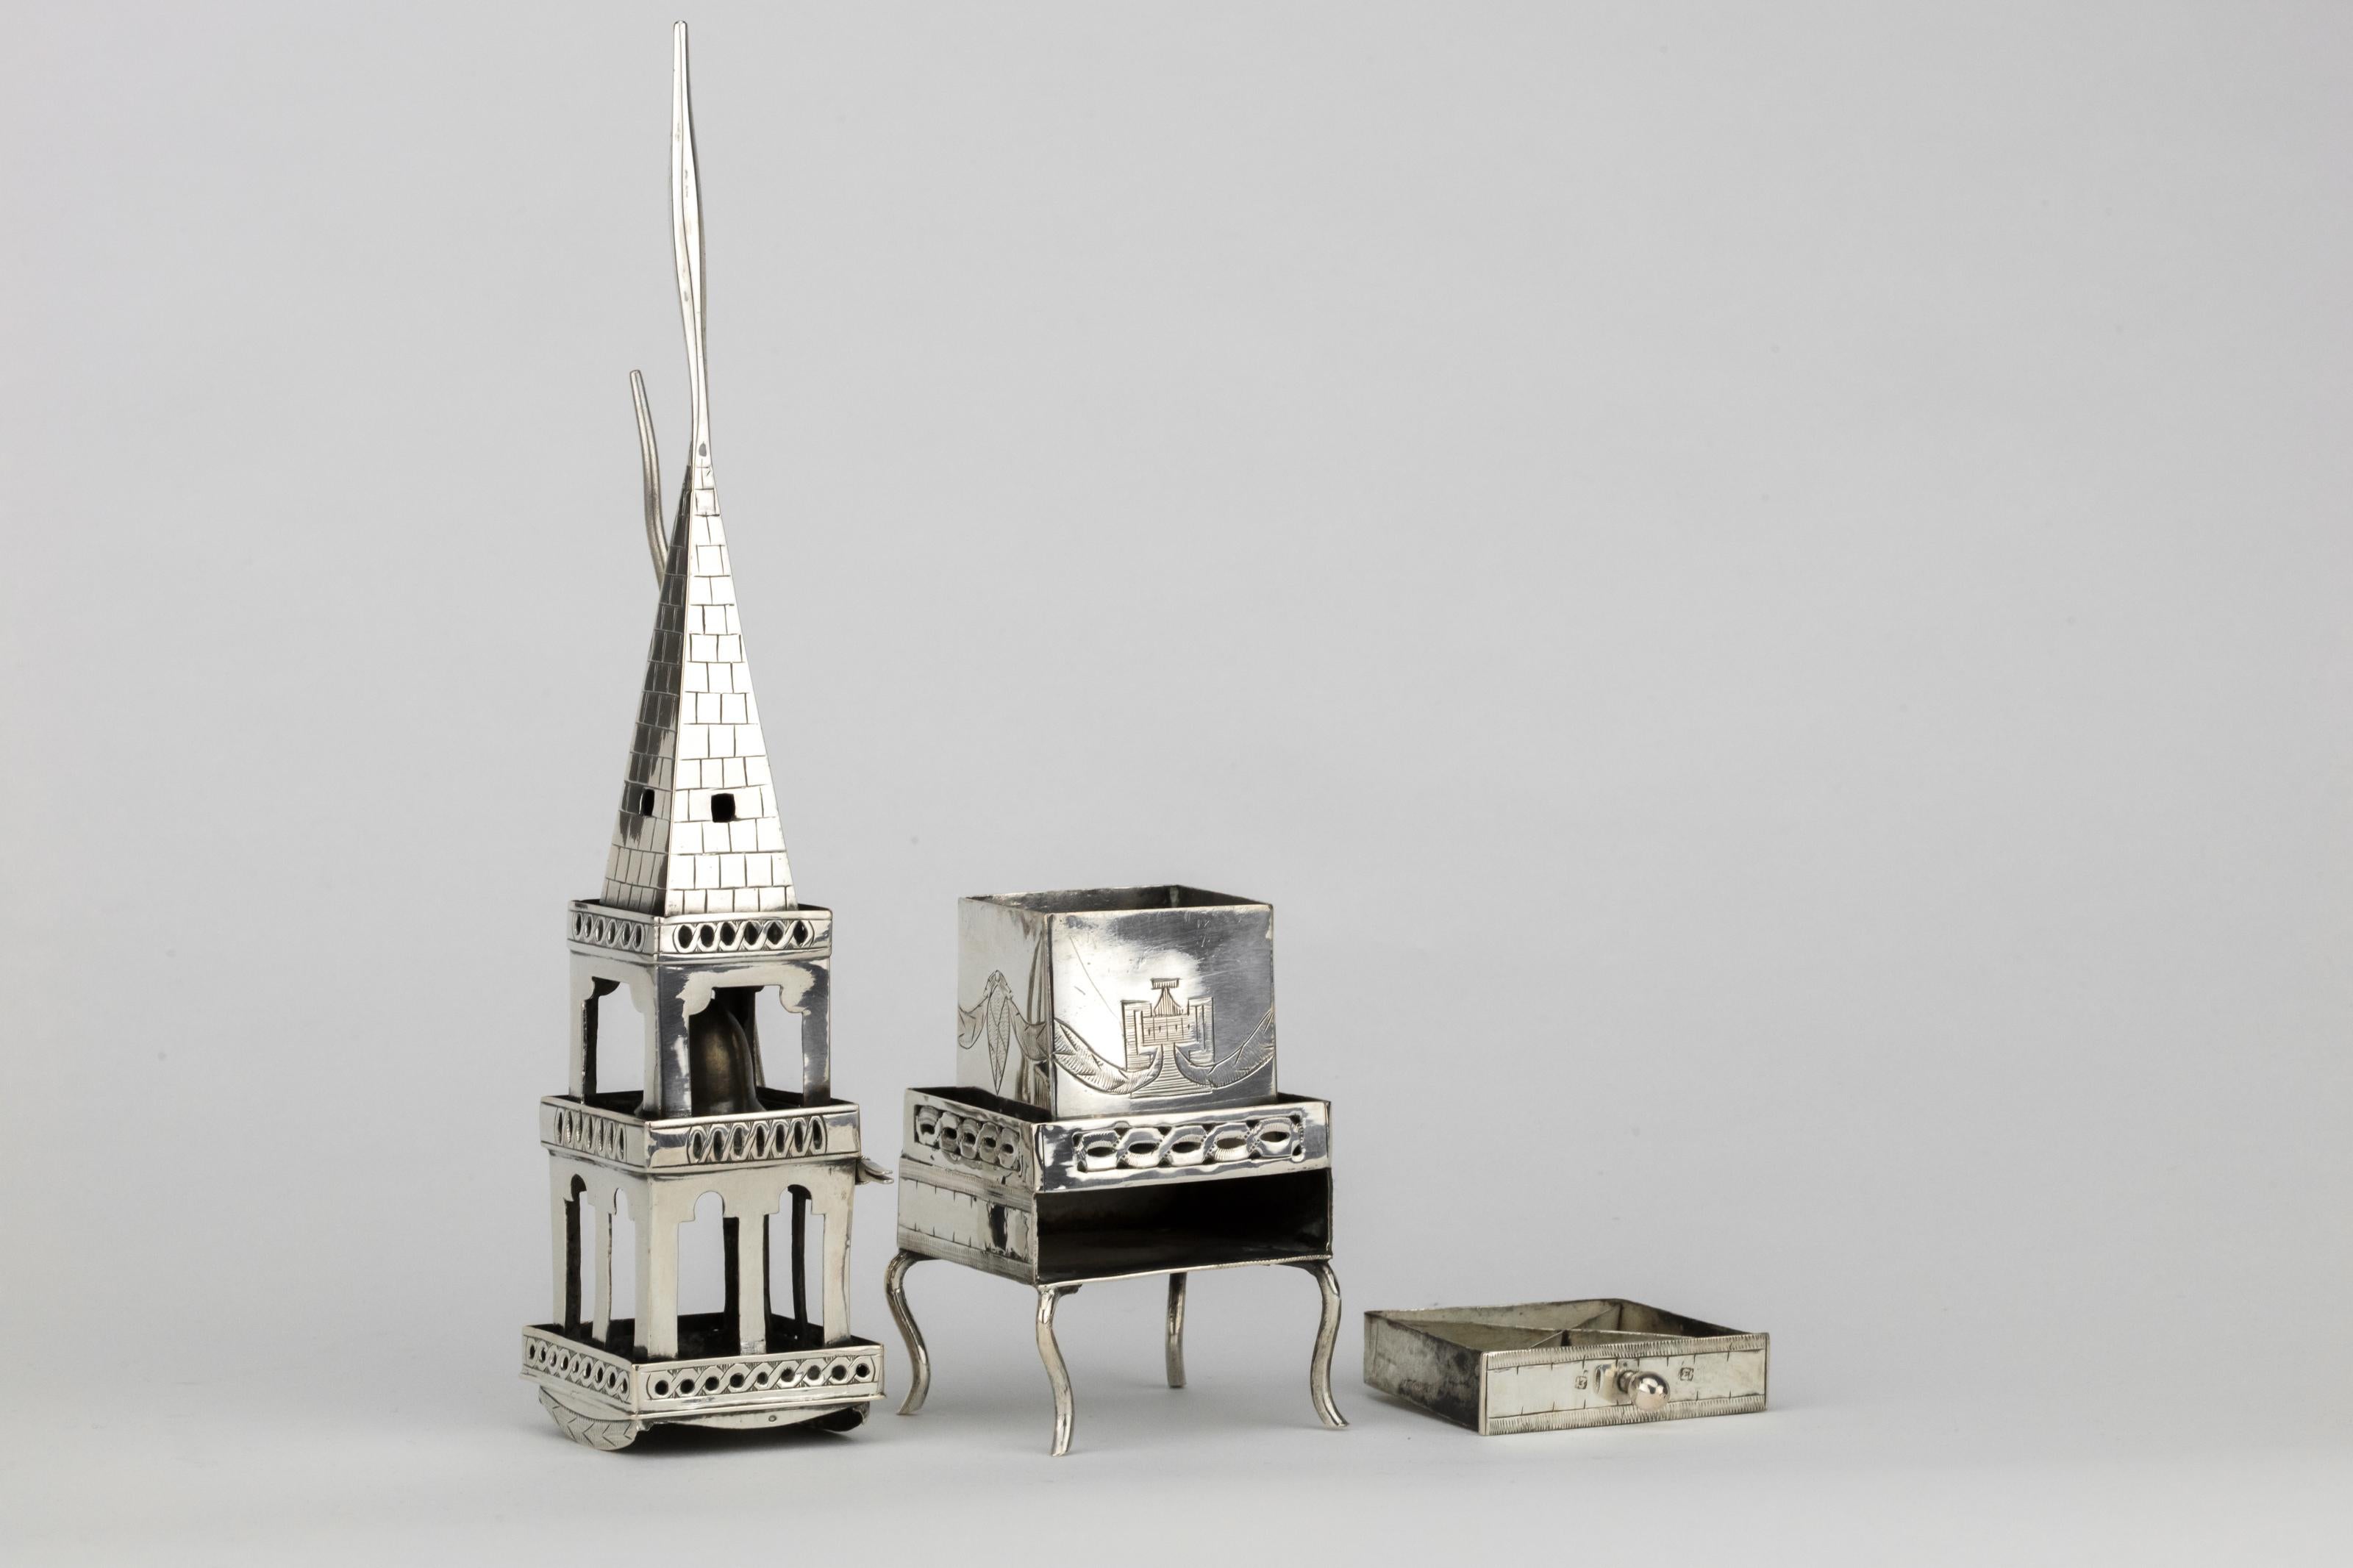 Handmade silver spice tower and Havdalah compendium, Lemberg, Habsburg Empire, circa 1800.
The upper part of the tower designed to hold the Havdalah candle decorated with the snake shaped holder, the bottom part contains the spice with a draw for